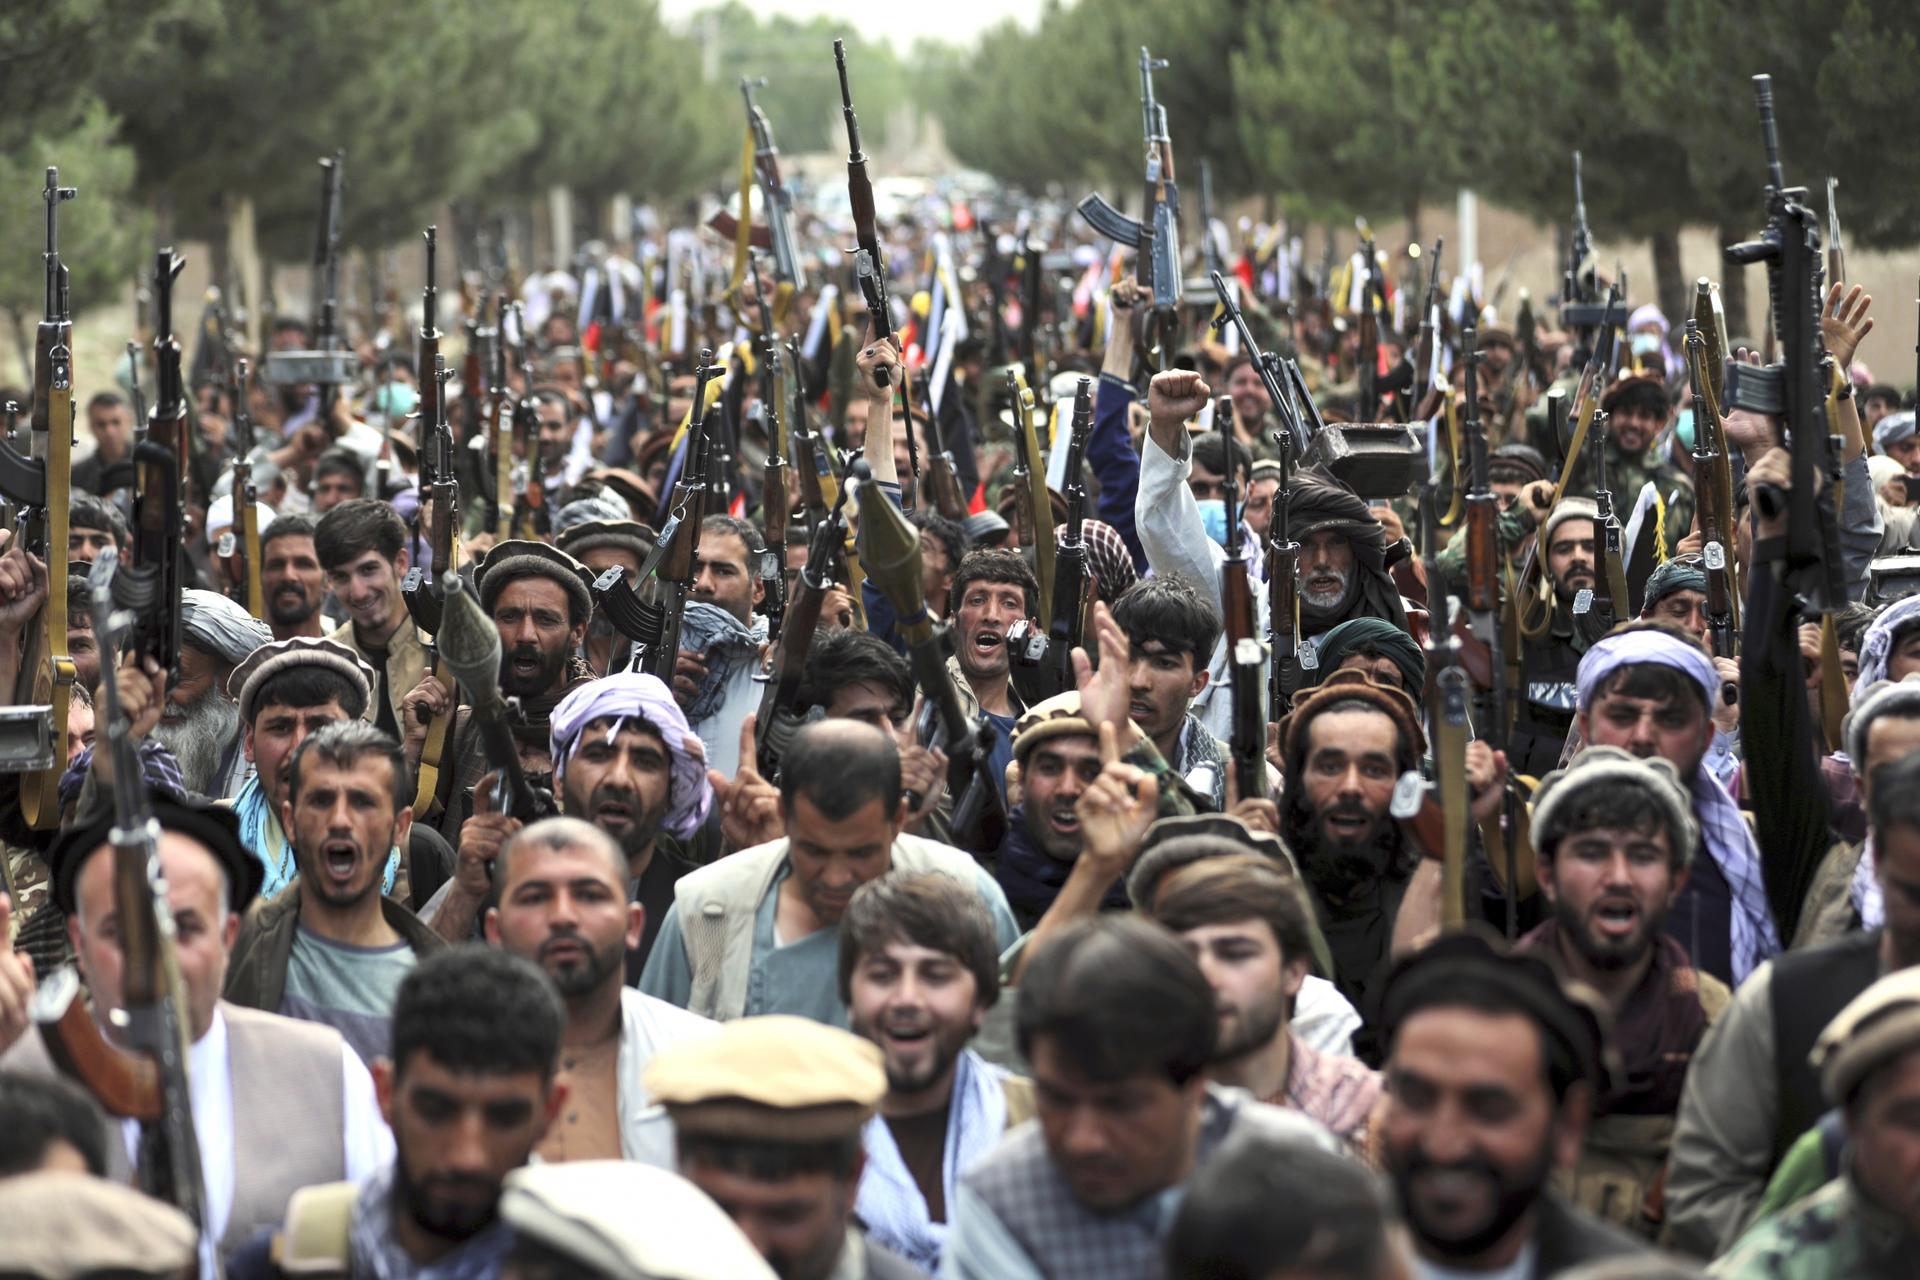 A crowd of Taliban fighters in a road, holding automatic rifles in the air